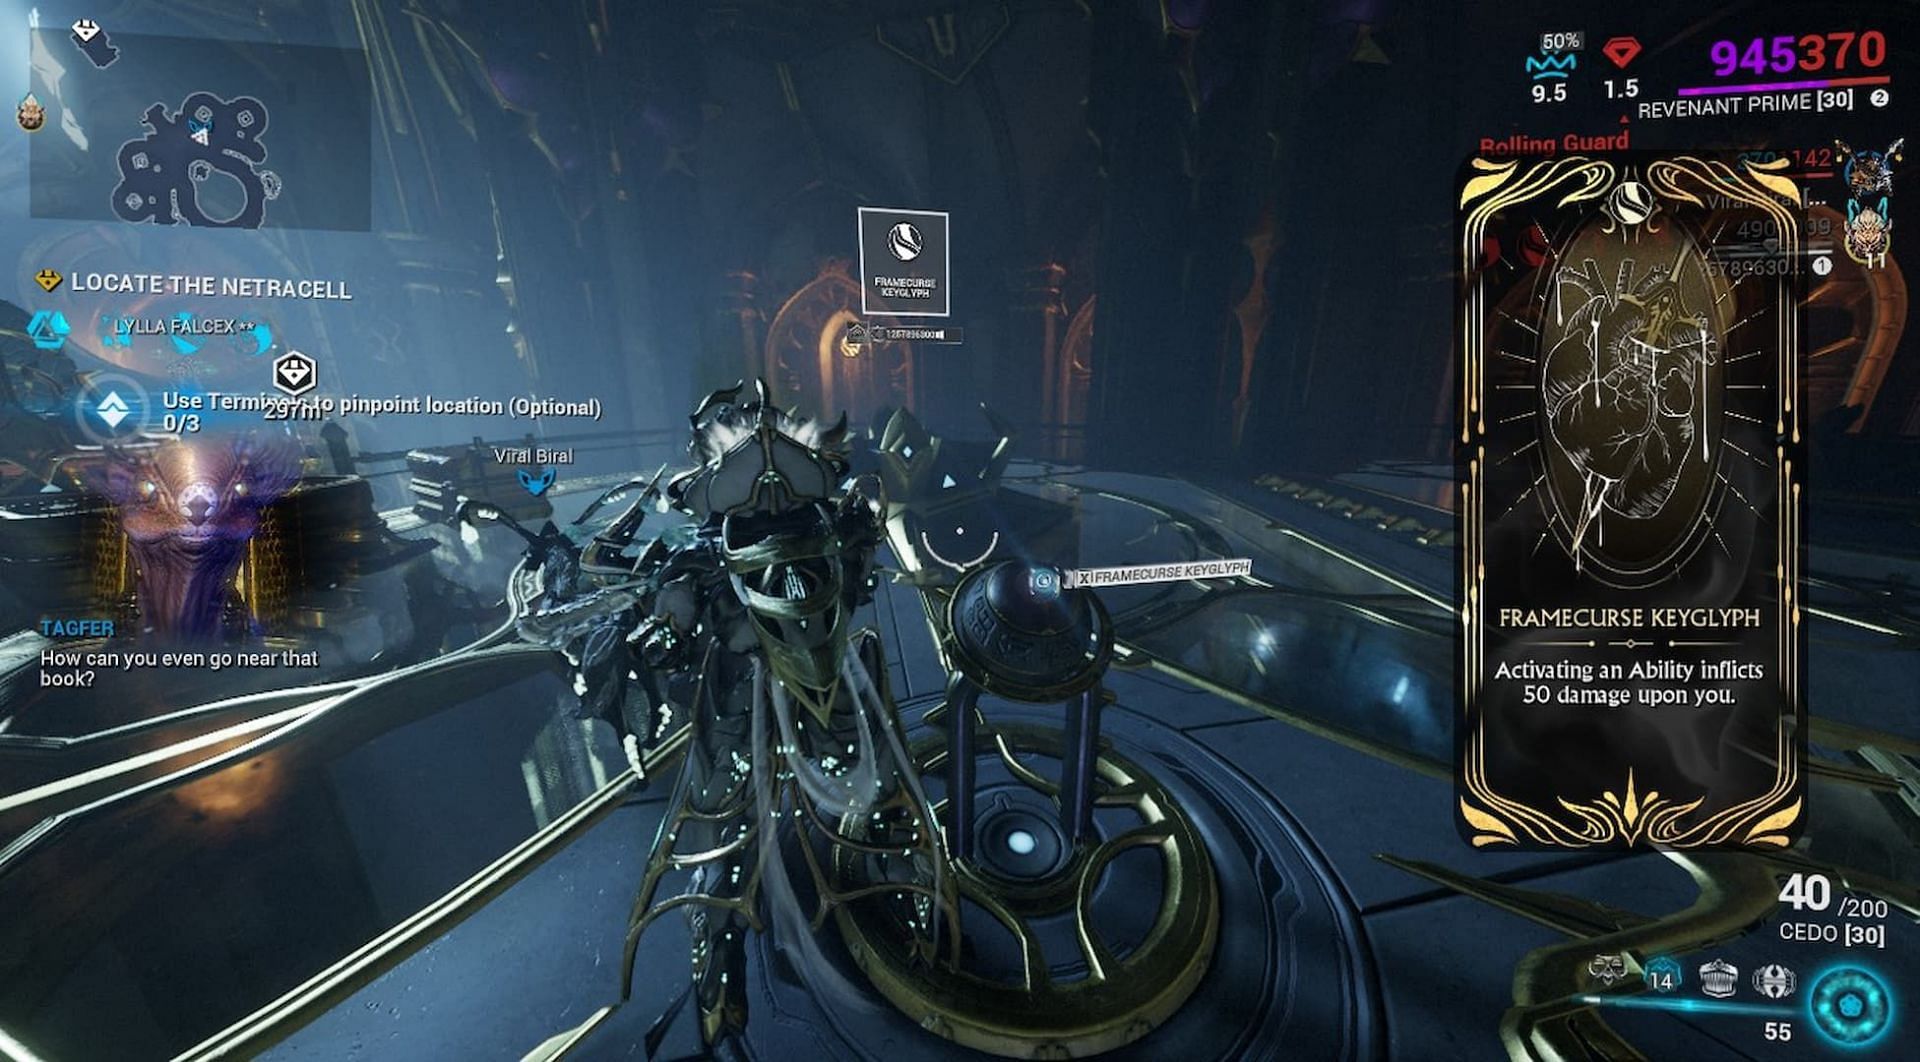 One player can carry all four keyglyphs (Image via Digital Extremes)